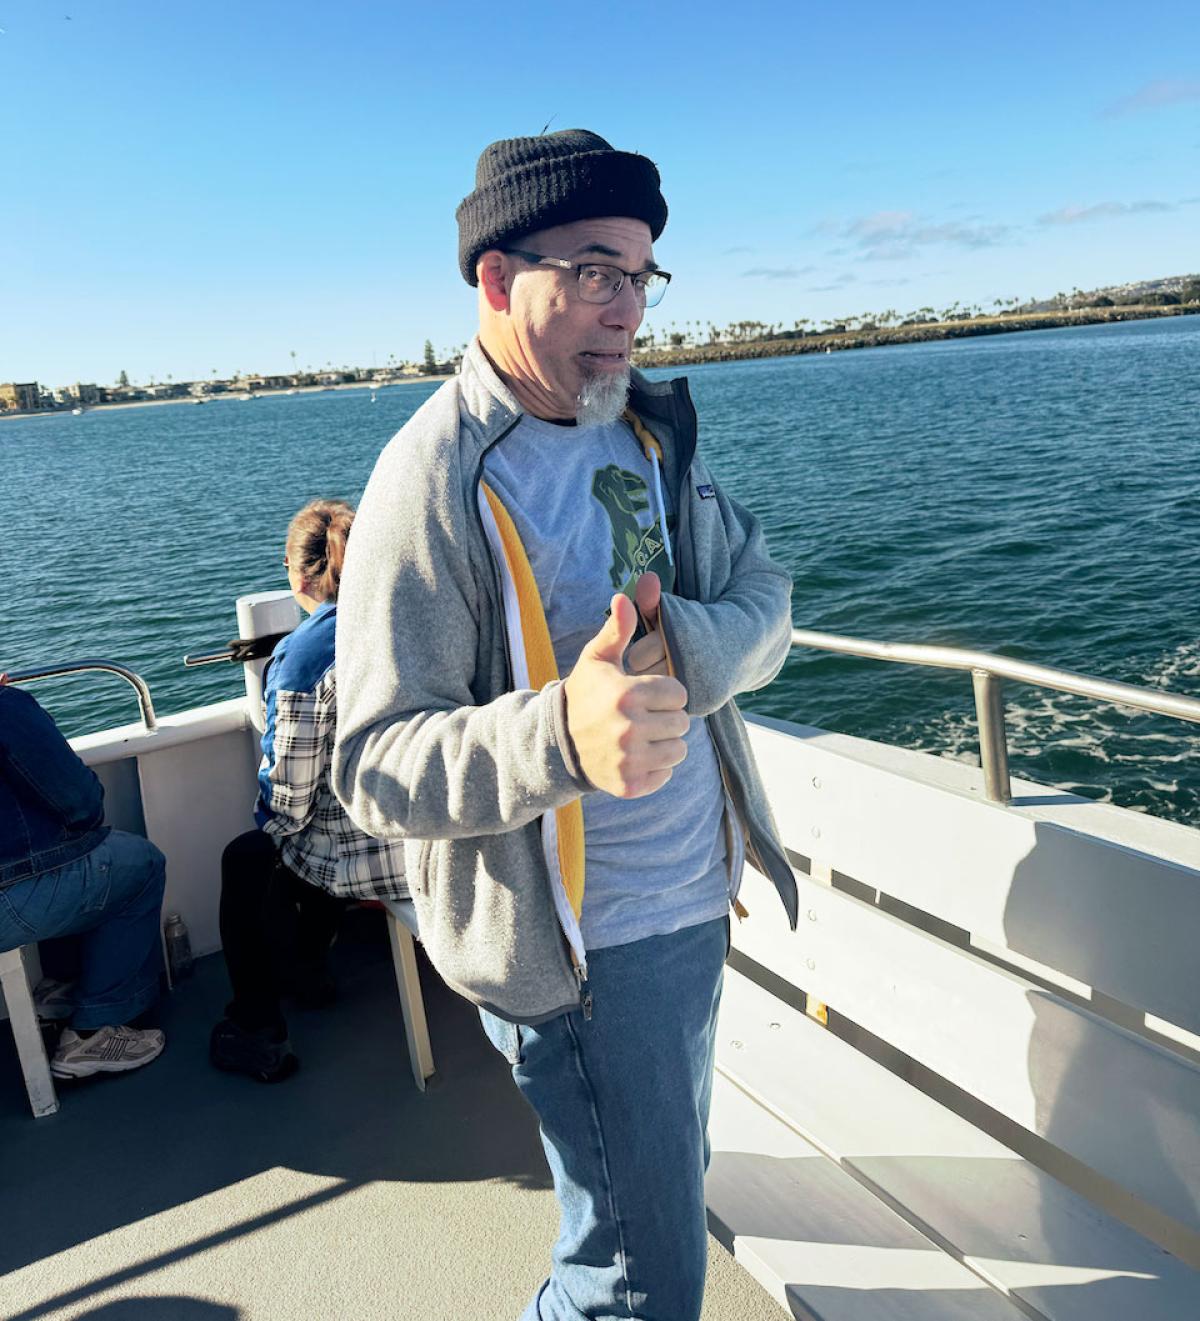 David on the boat giving a "thumbs up" with ocean in background